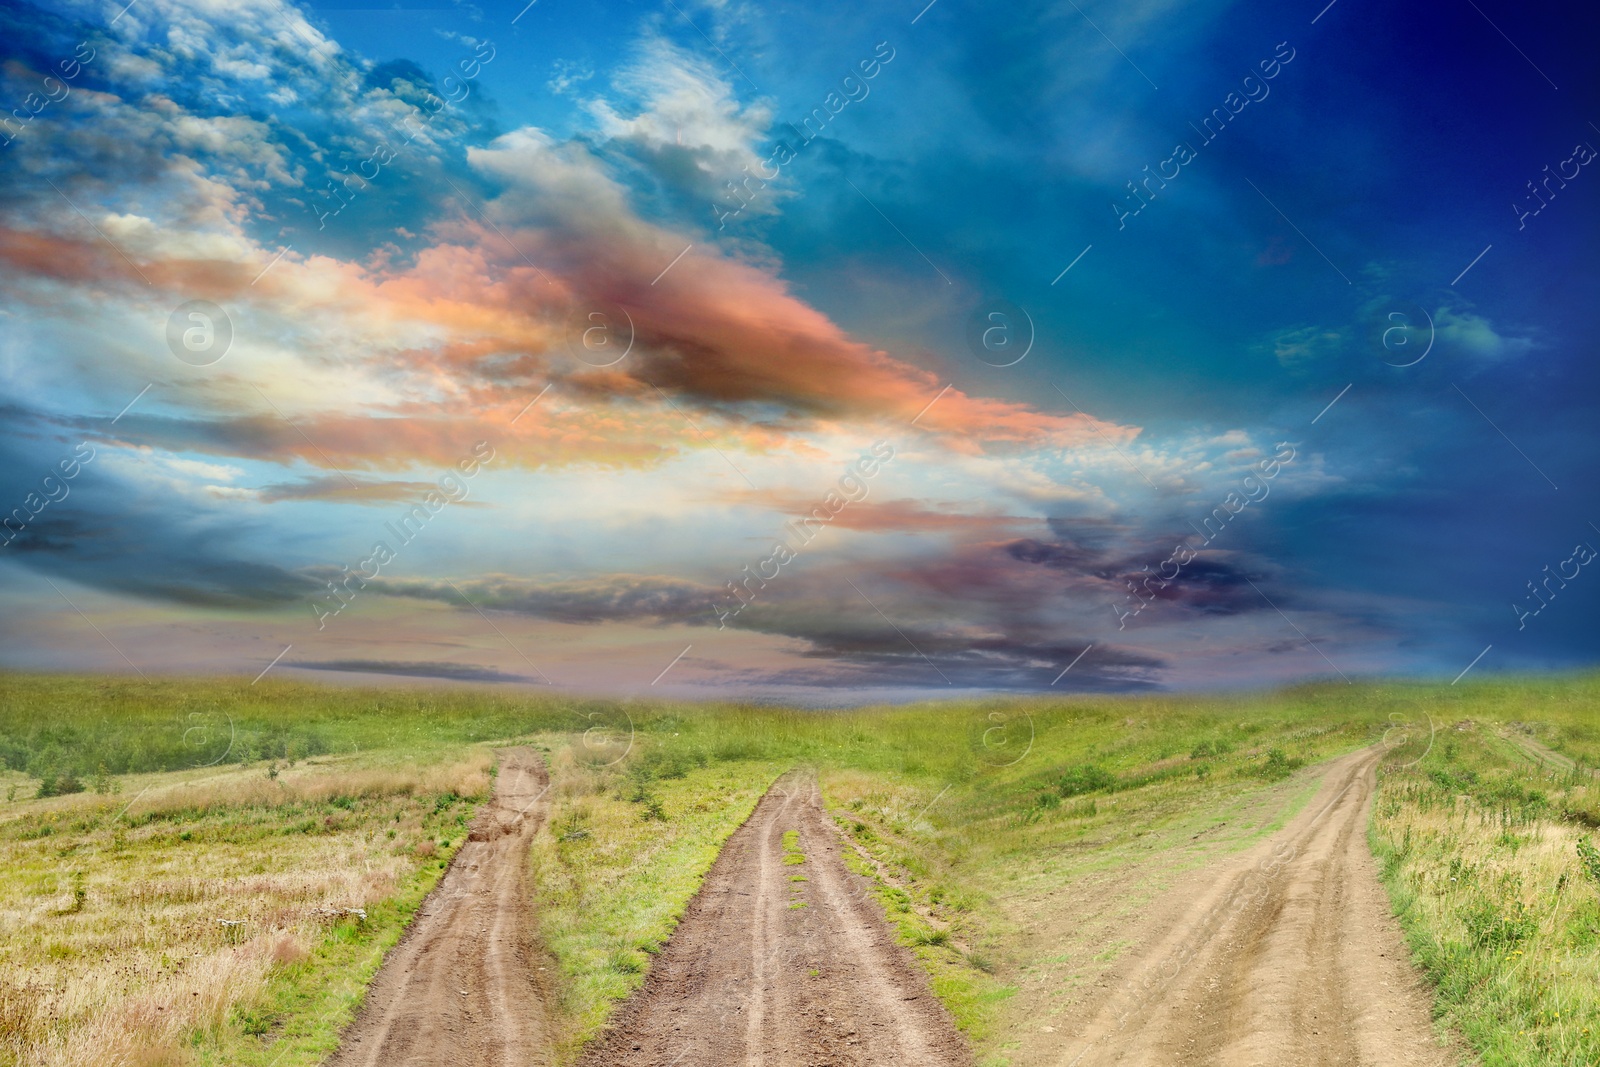 Image of Choosing way. Picturesque landscape with different roads